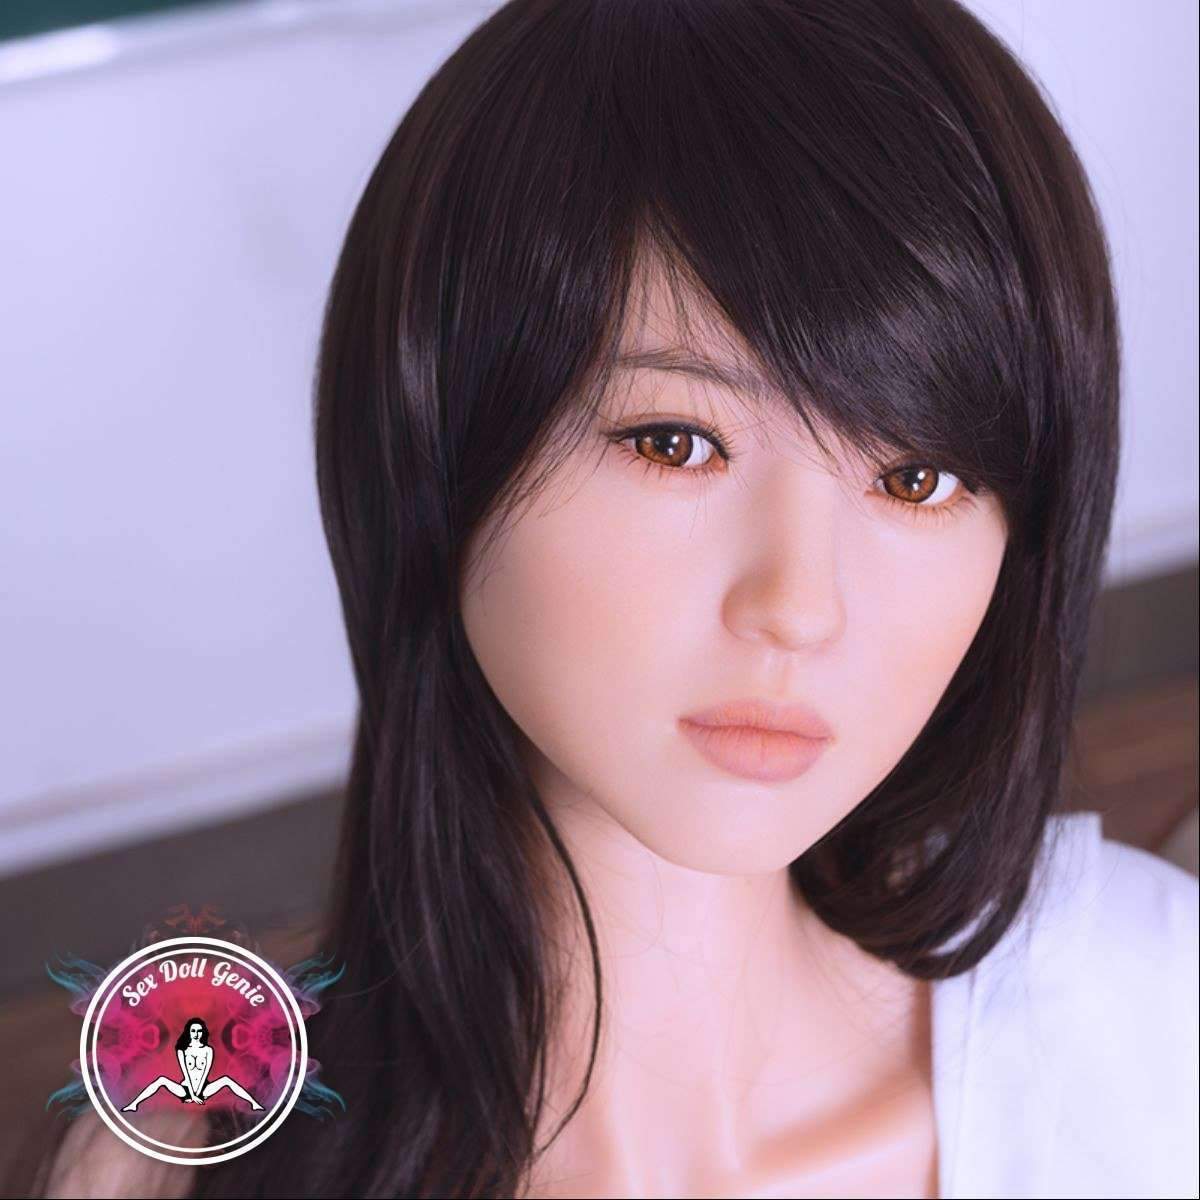 DS Doll - 167evo - Sharon Head - Type 2 D Cup Silicone Doll-15